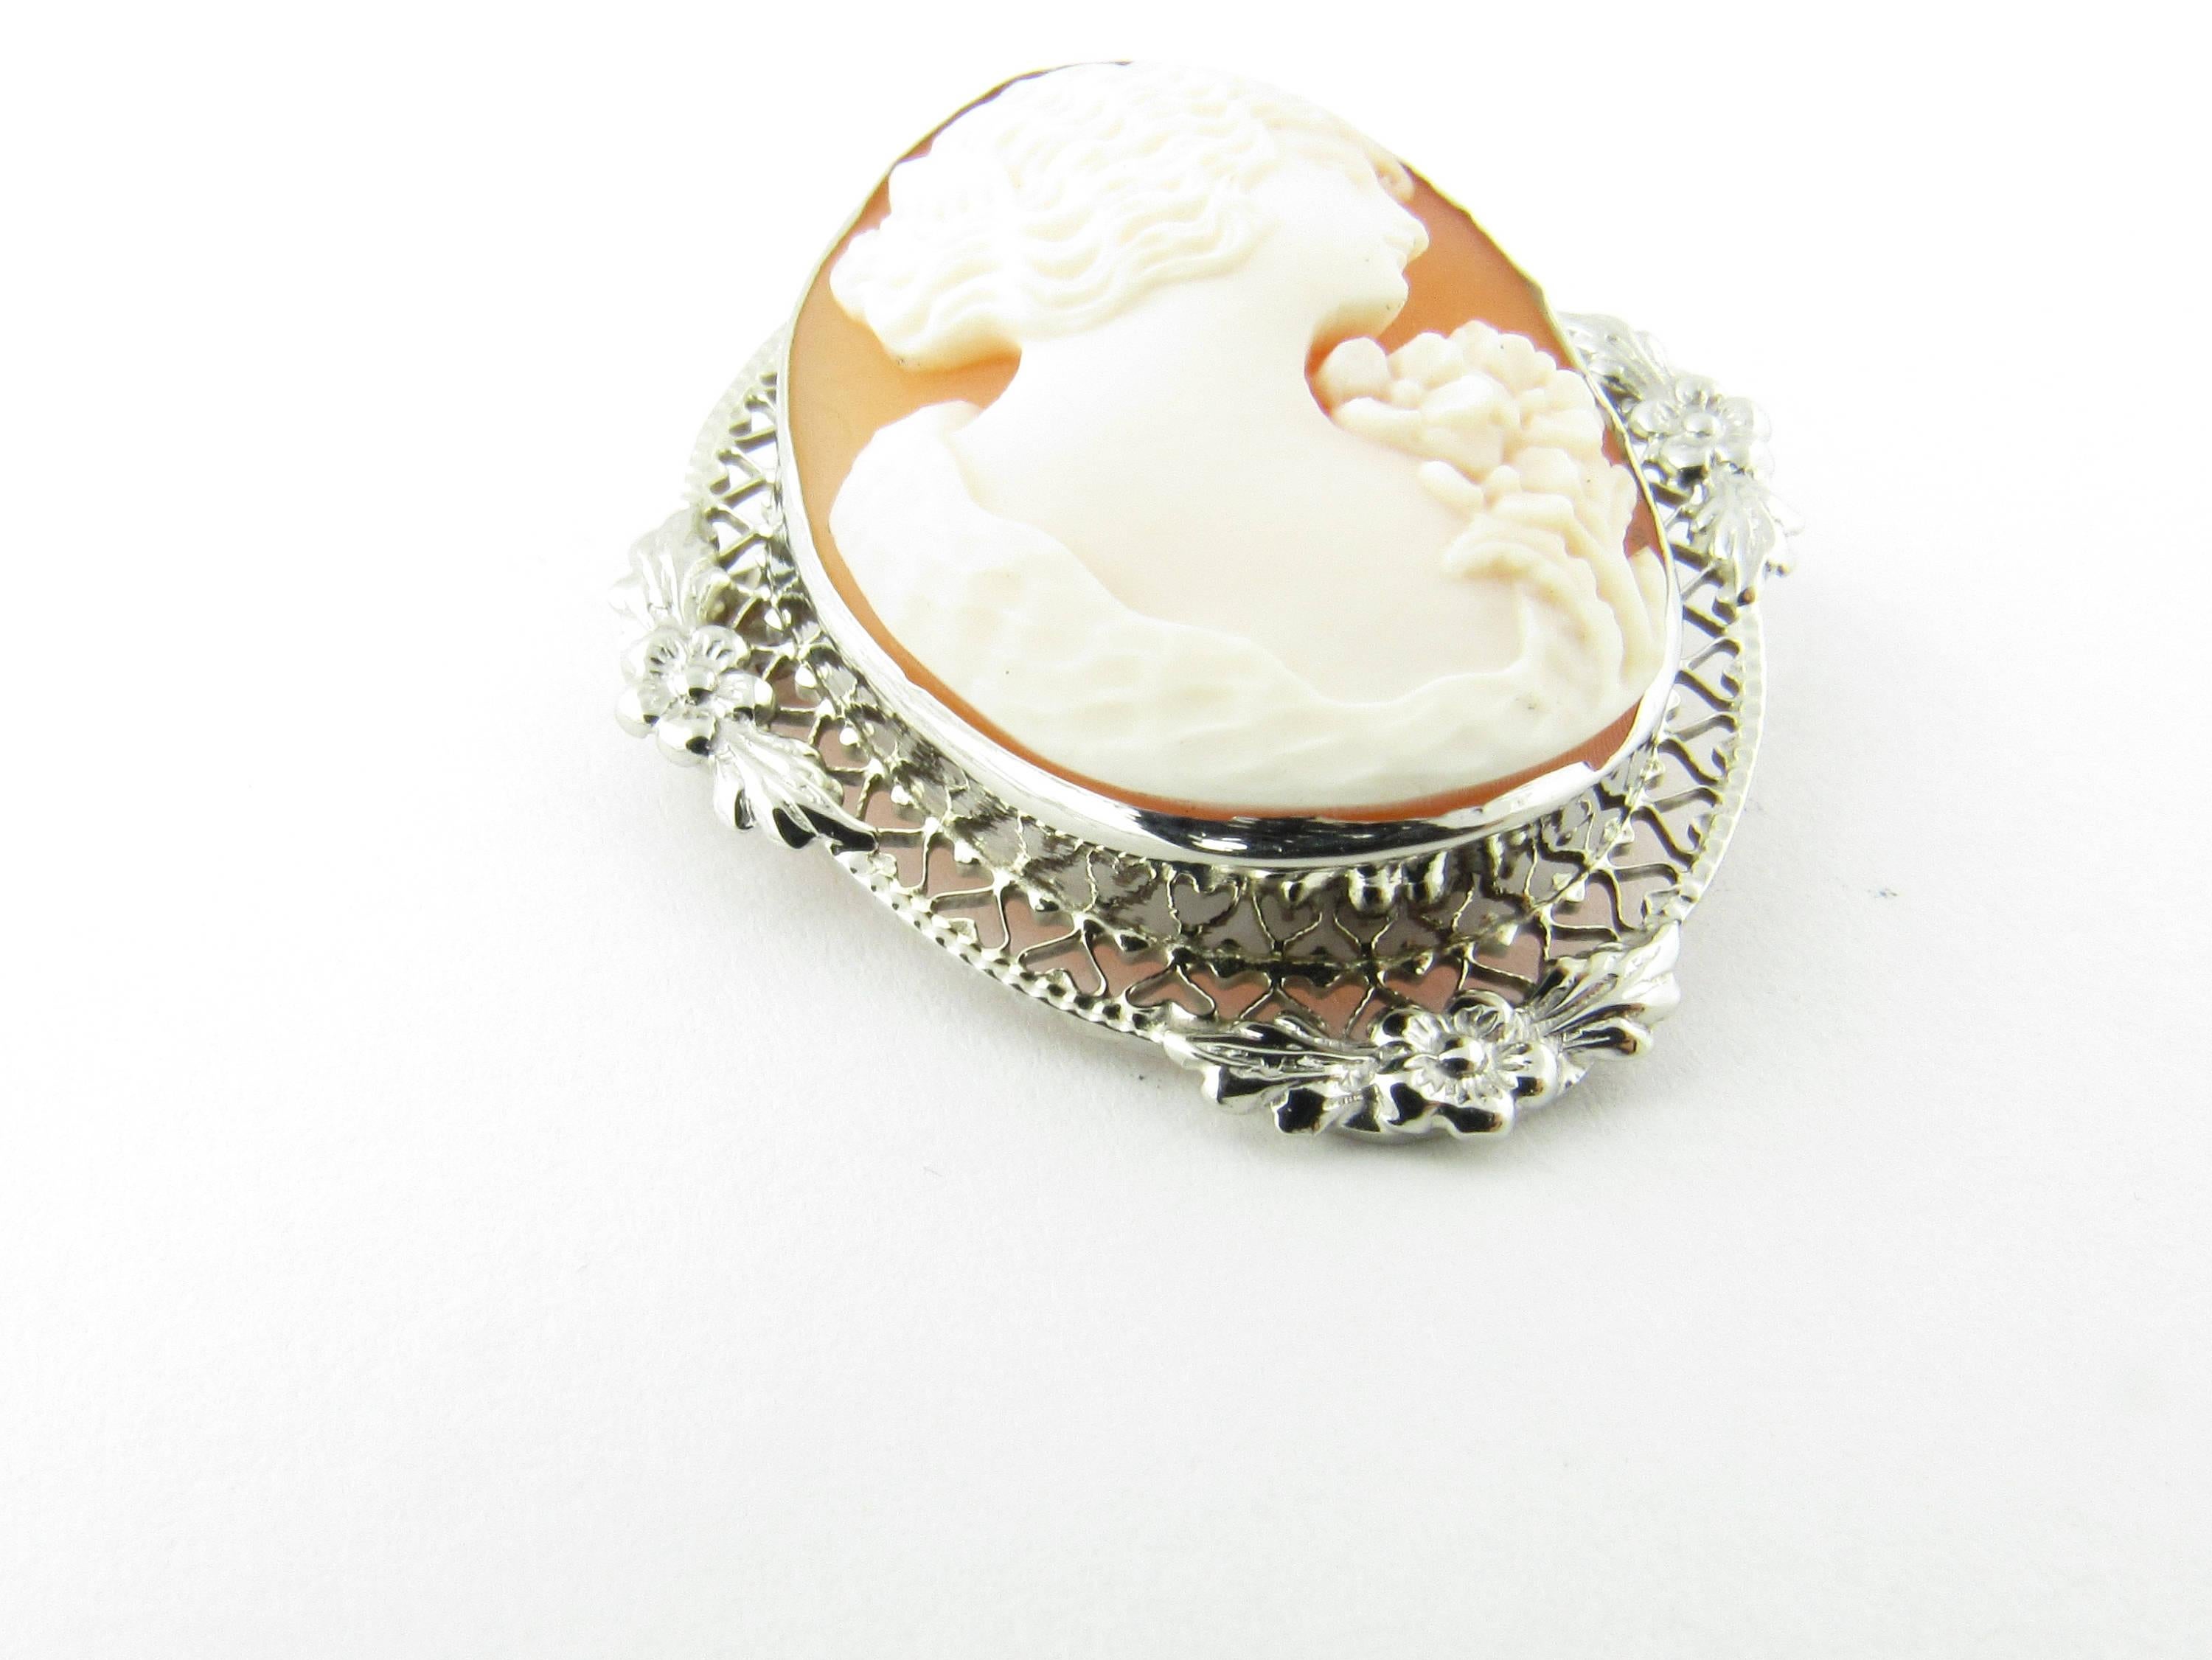 Vintage 14 Karat White Gold Cameo Brooch/Pendant-

This lovely cameo features a lovely lady in profile framed in exquisite white gold filigree. Can be worn as a pendant or a brooch.

Size: 33 mm x 29 mm

Weight: 3.6 dwt. / 5.6 gr.

Hallmark: